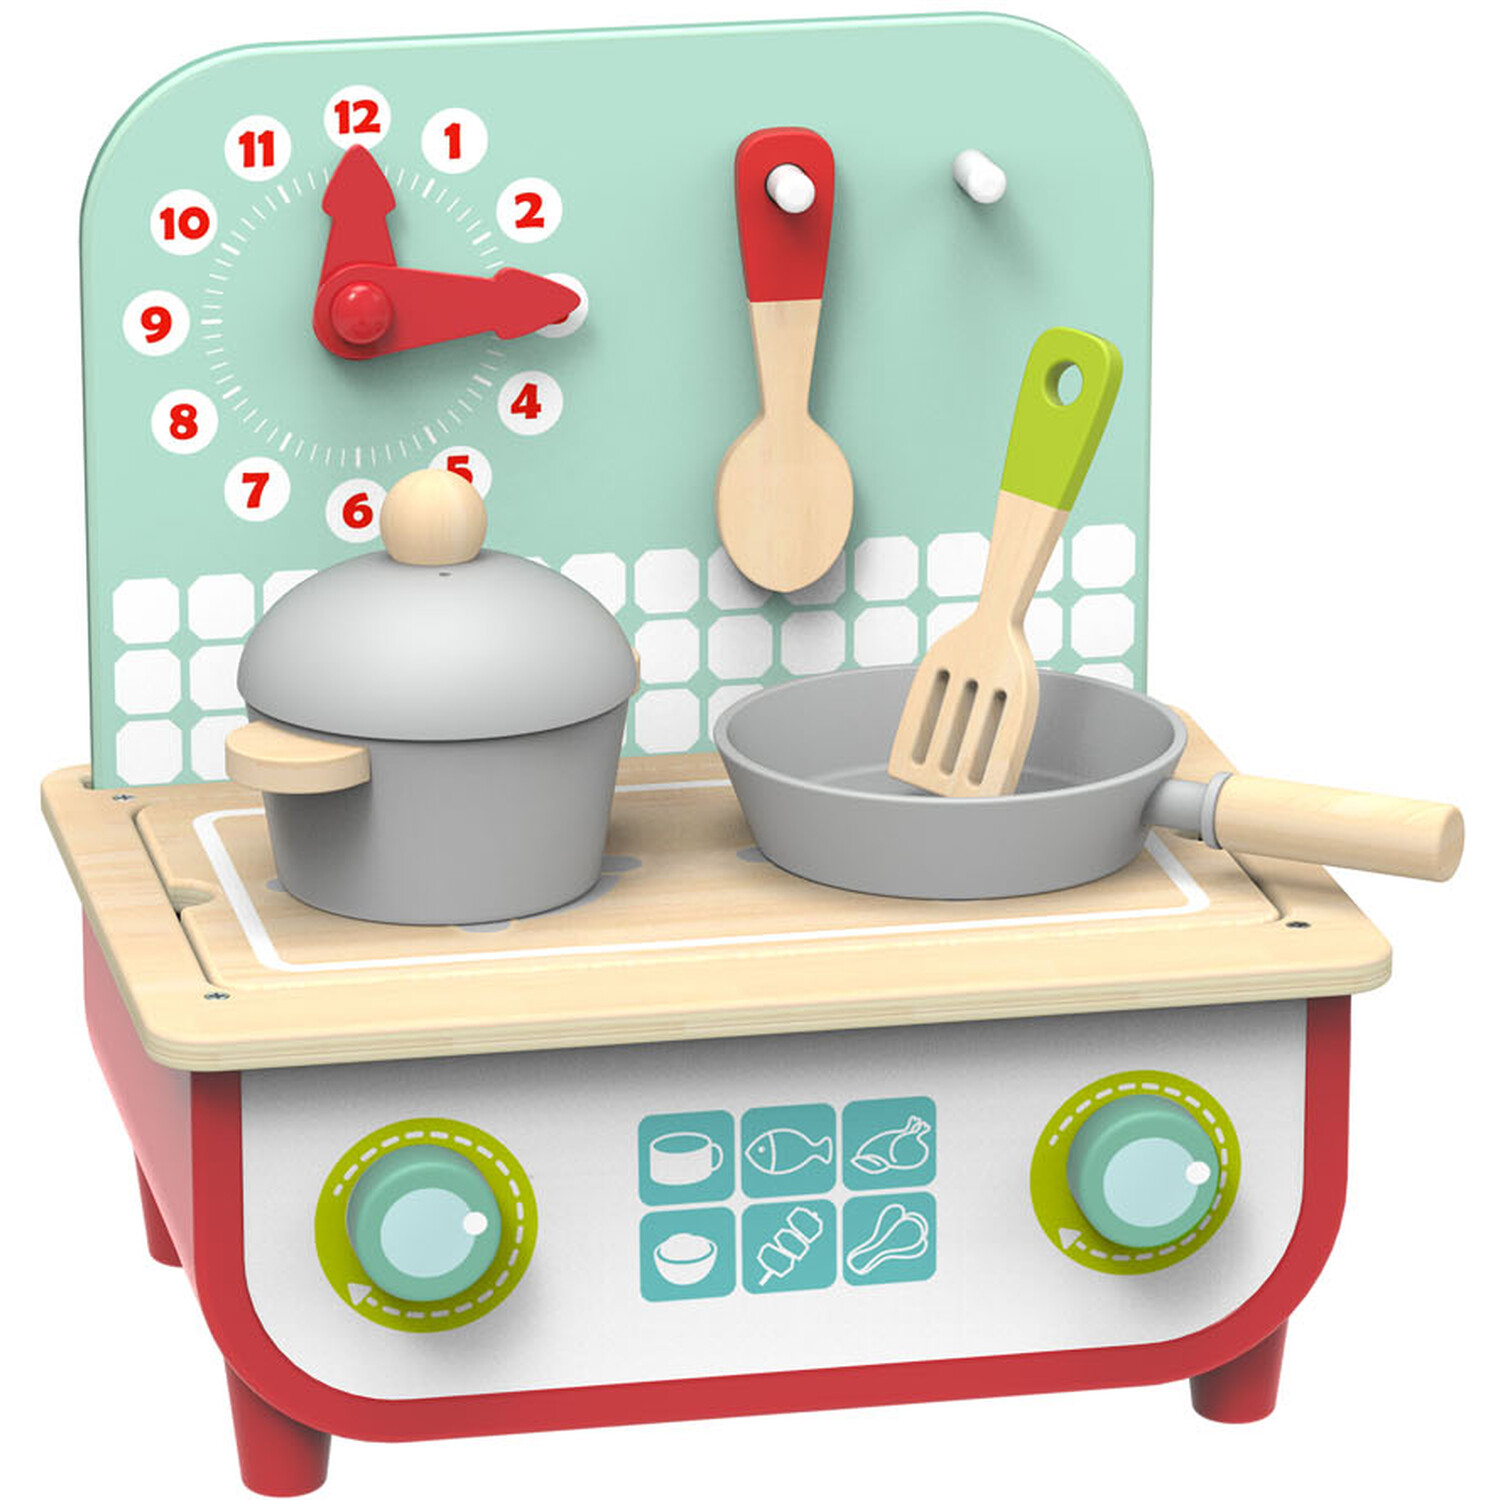 Imaginate Kitchen Set and BBQ Toy Image 2